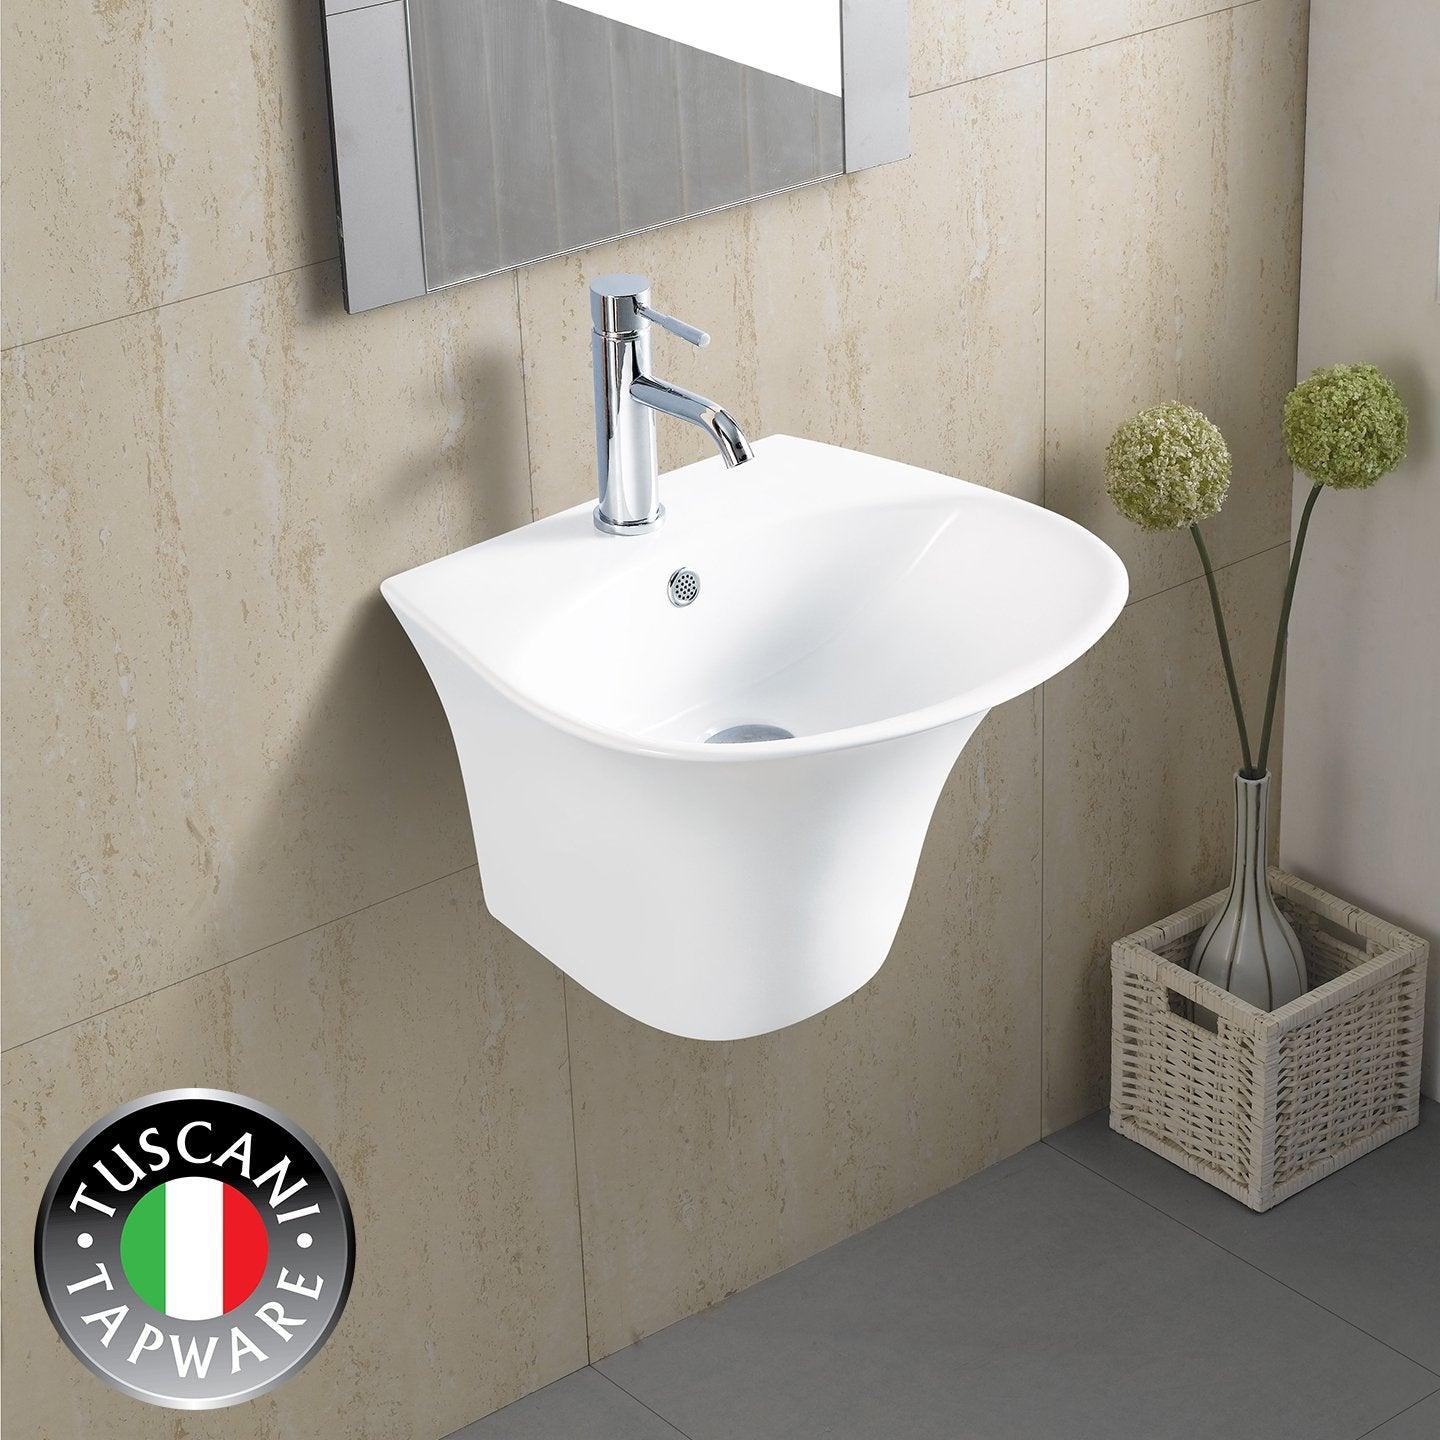 Photo of Wall Mounted Designer Basin - Deep Round Basin in White